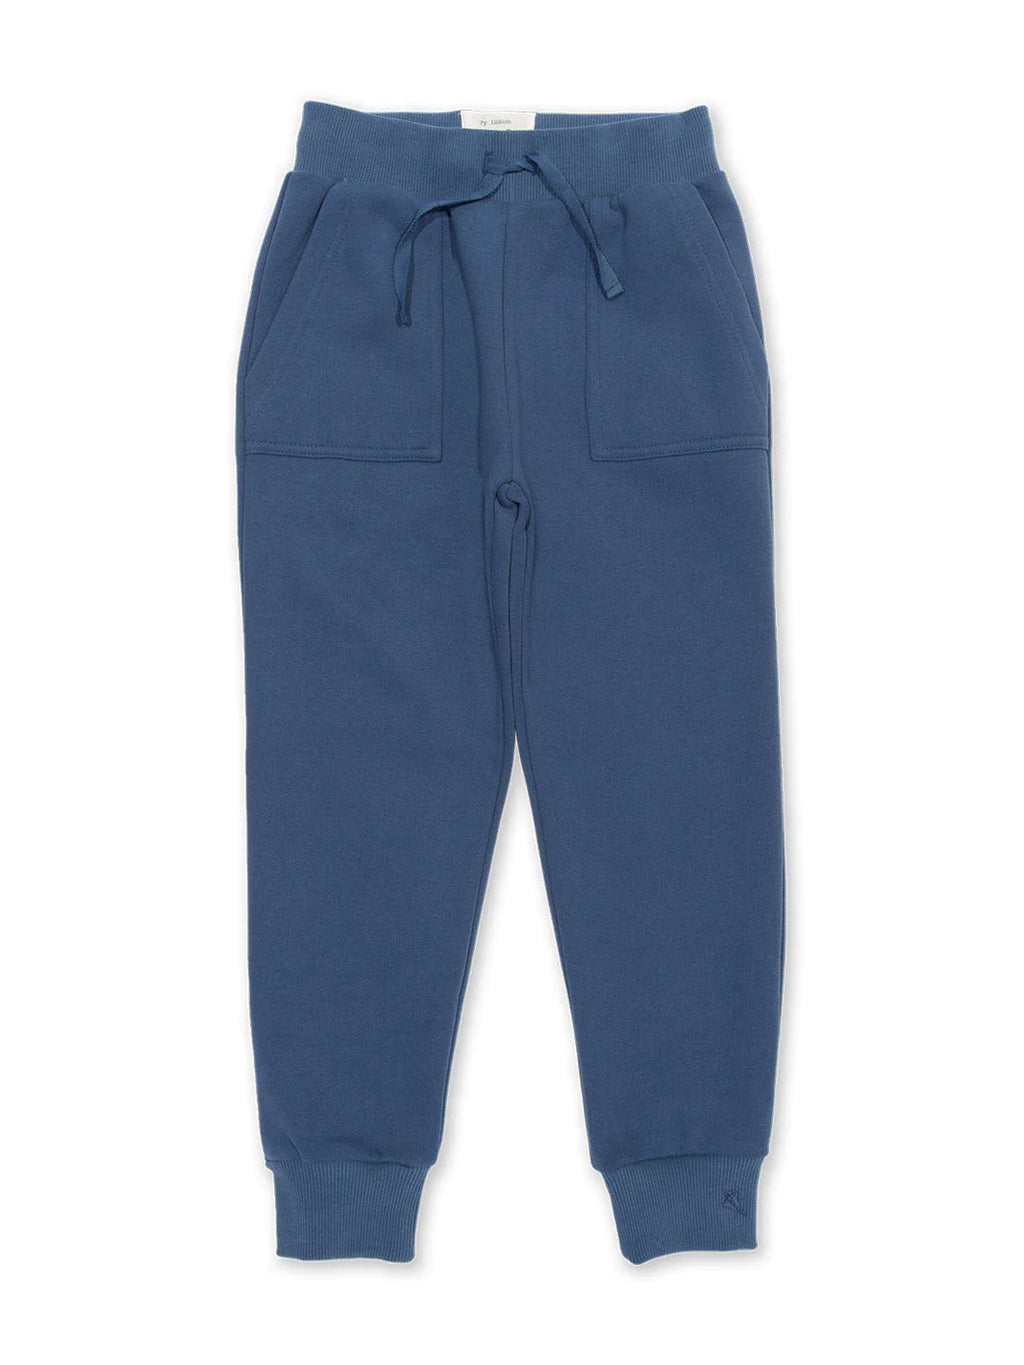 Kite Clothing Boys Navy Port & Starboard Joggers